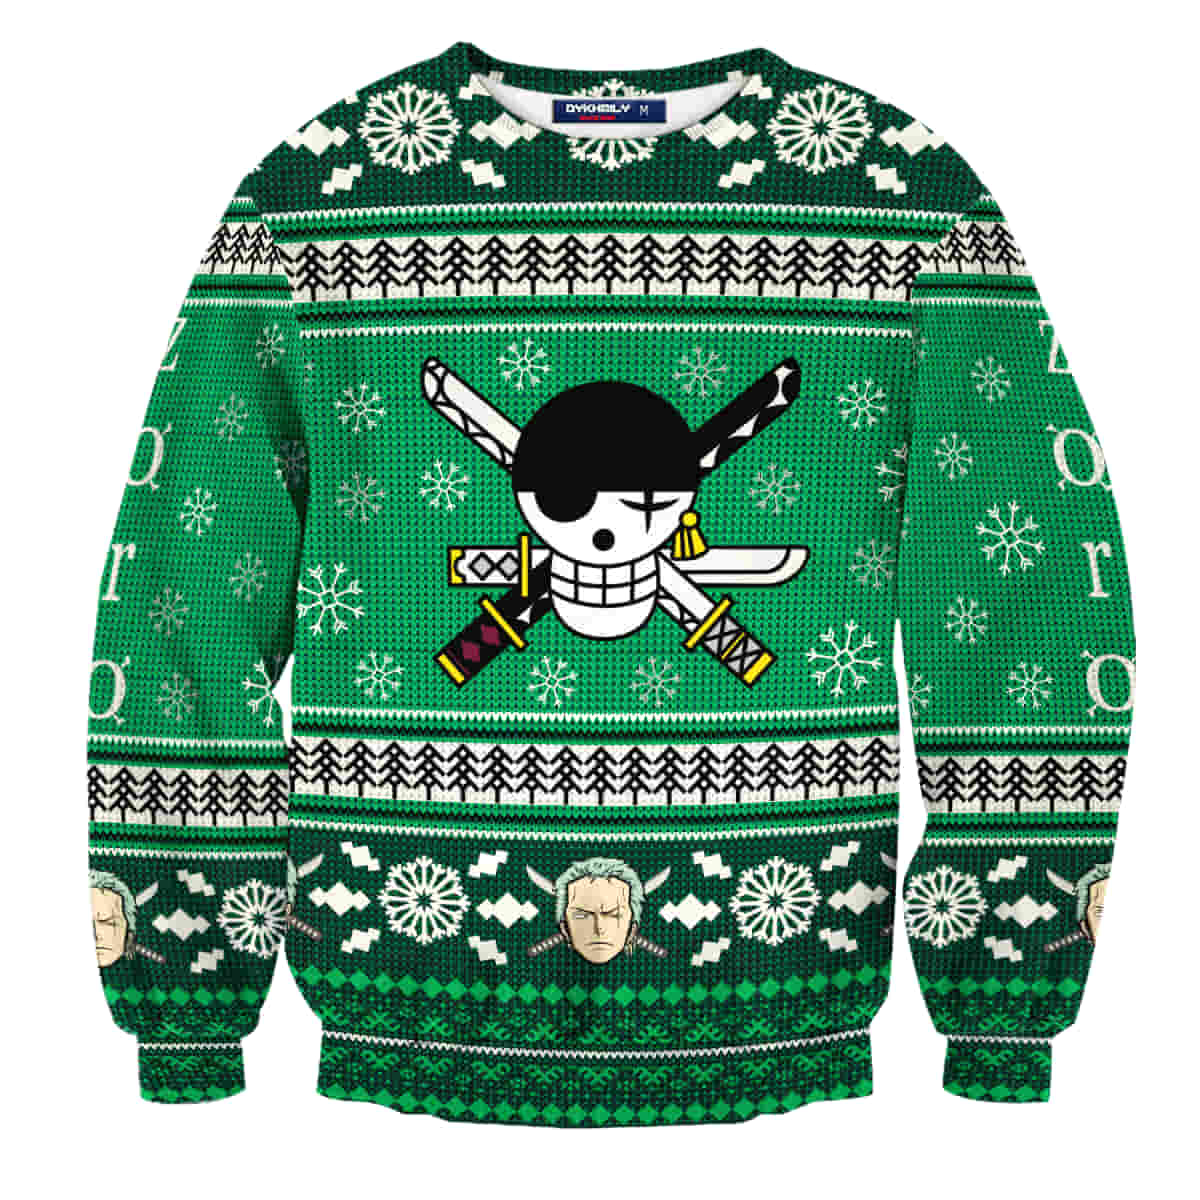 Zoro Wool Knitted Sweater, One Piece Christmas 3D Sweater